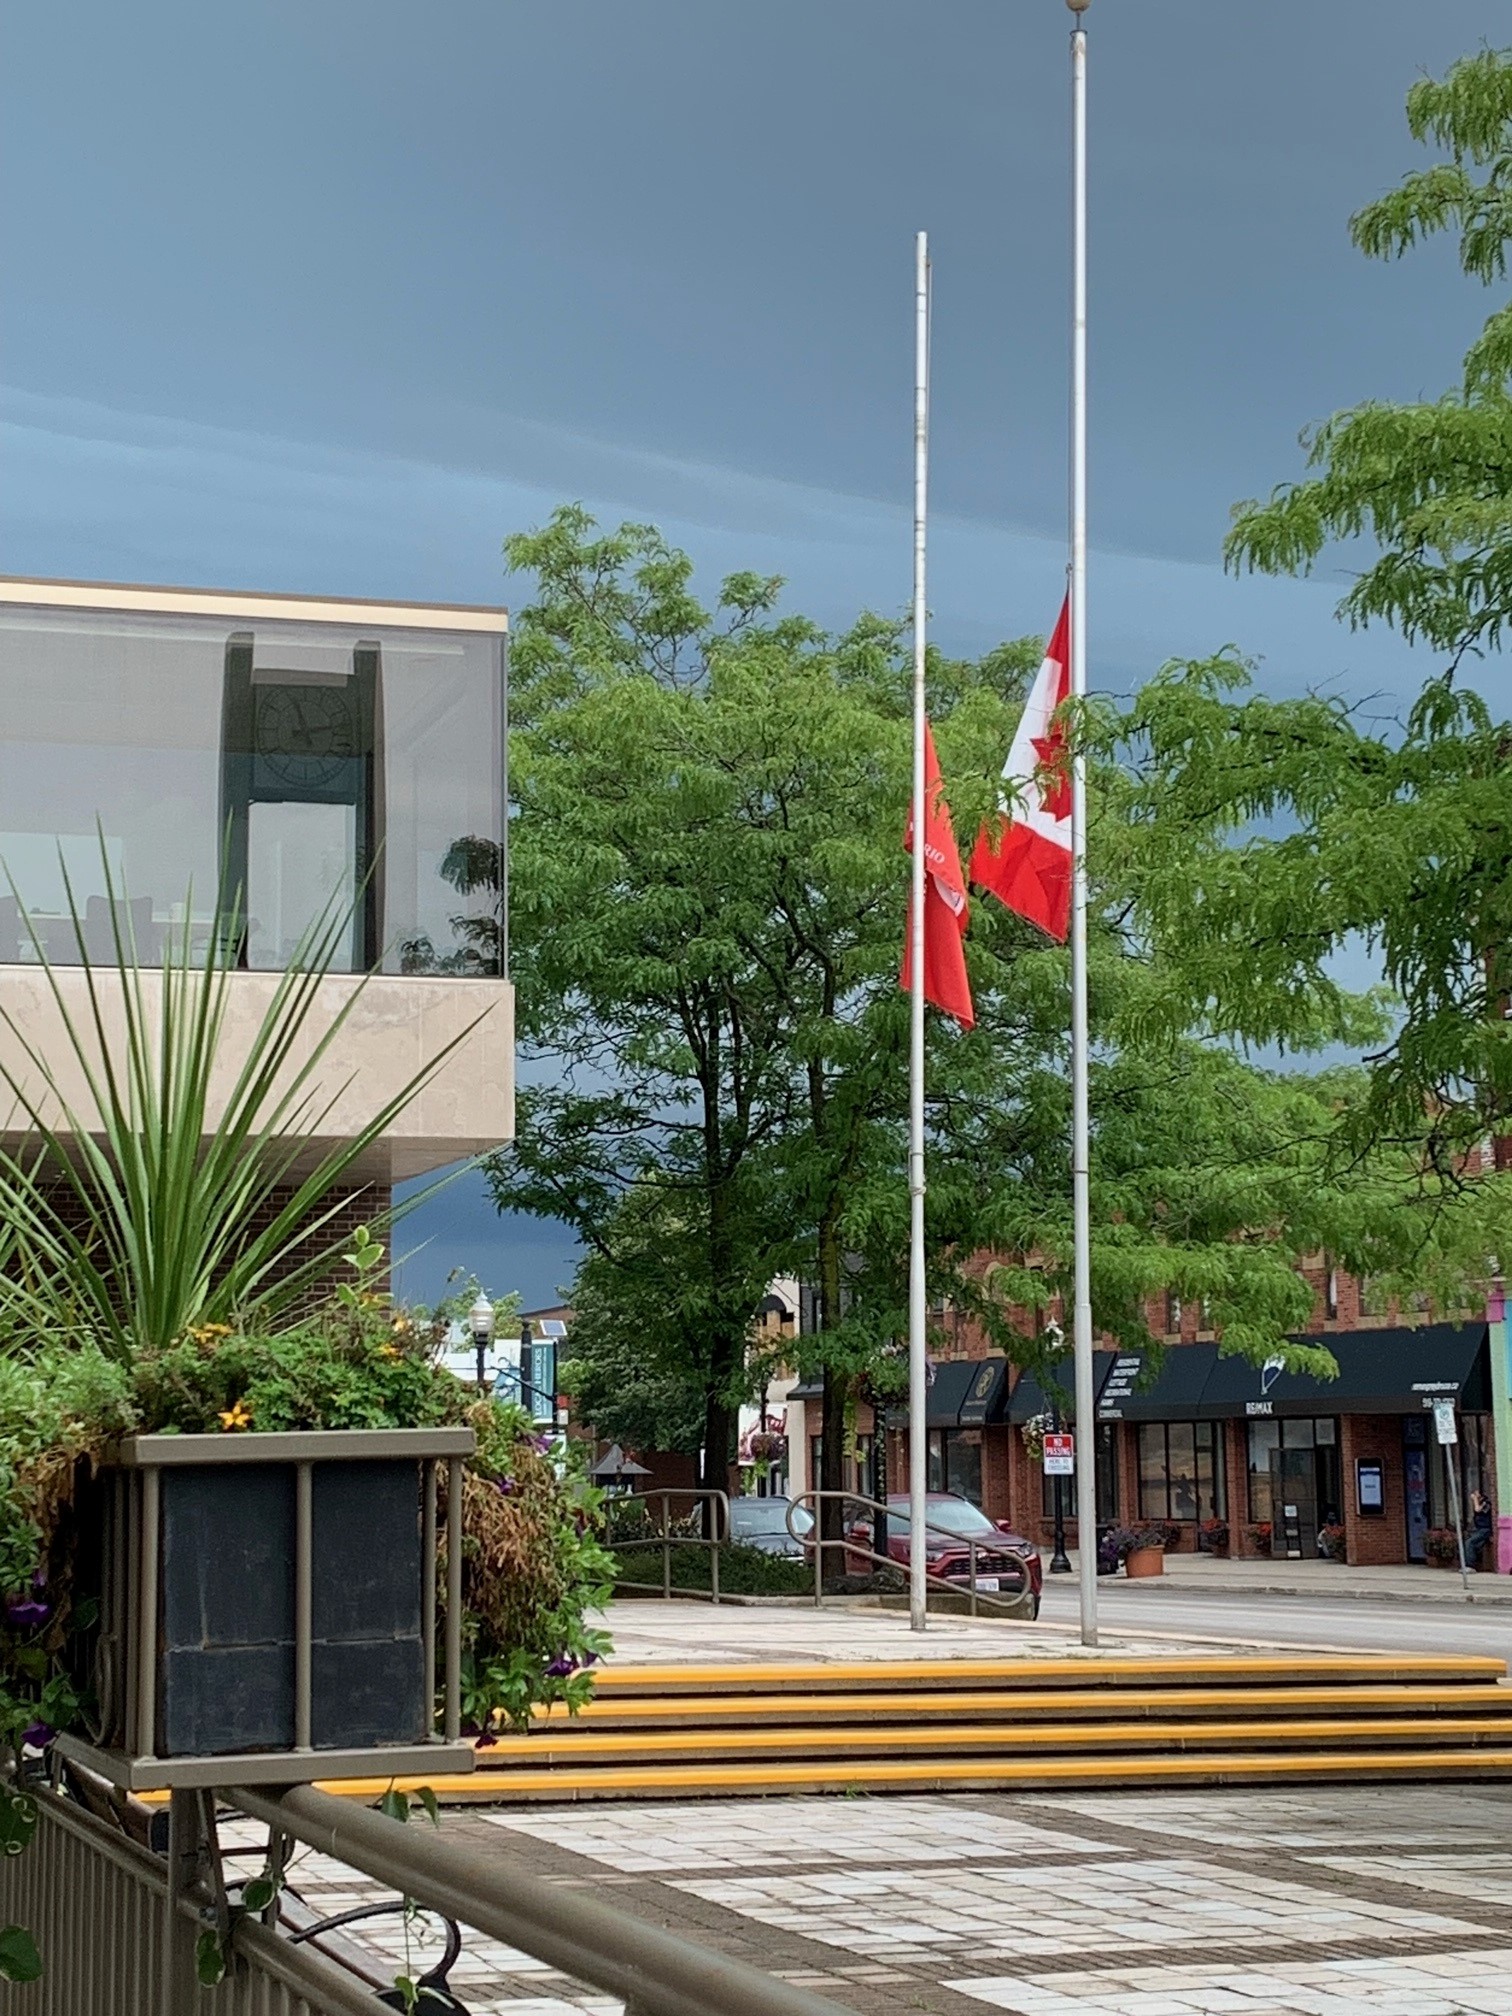 Image of Flags at City Facilities Half-Masted in Honour of National Day of Remembrance for Victims of Terrorism